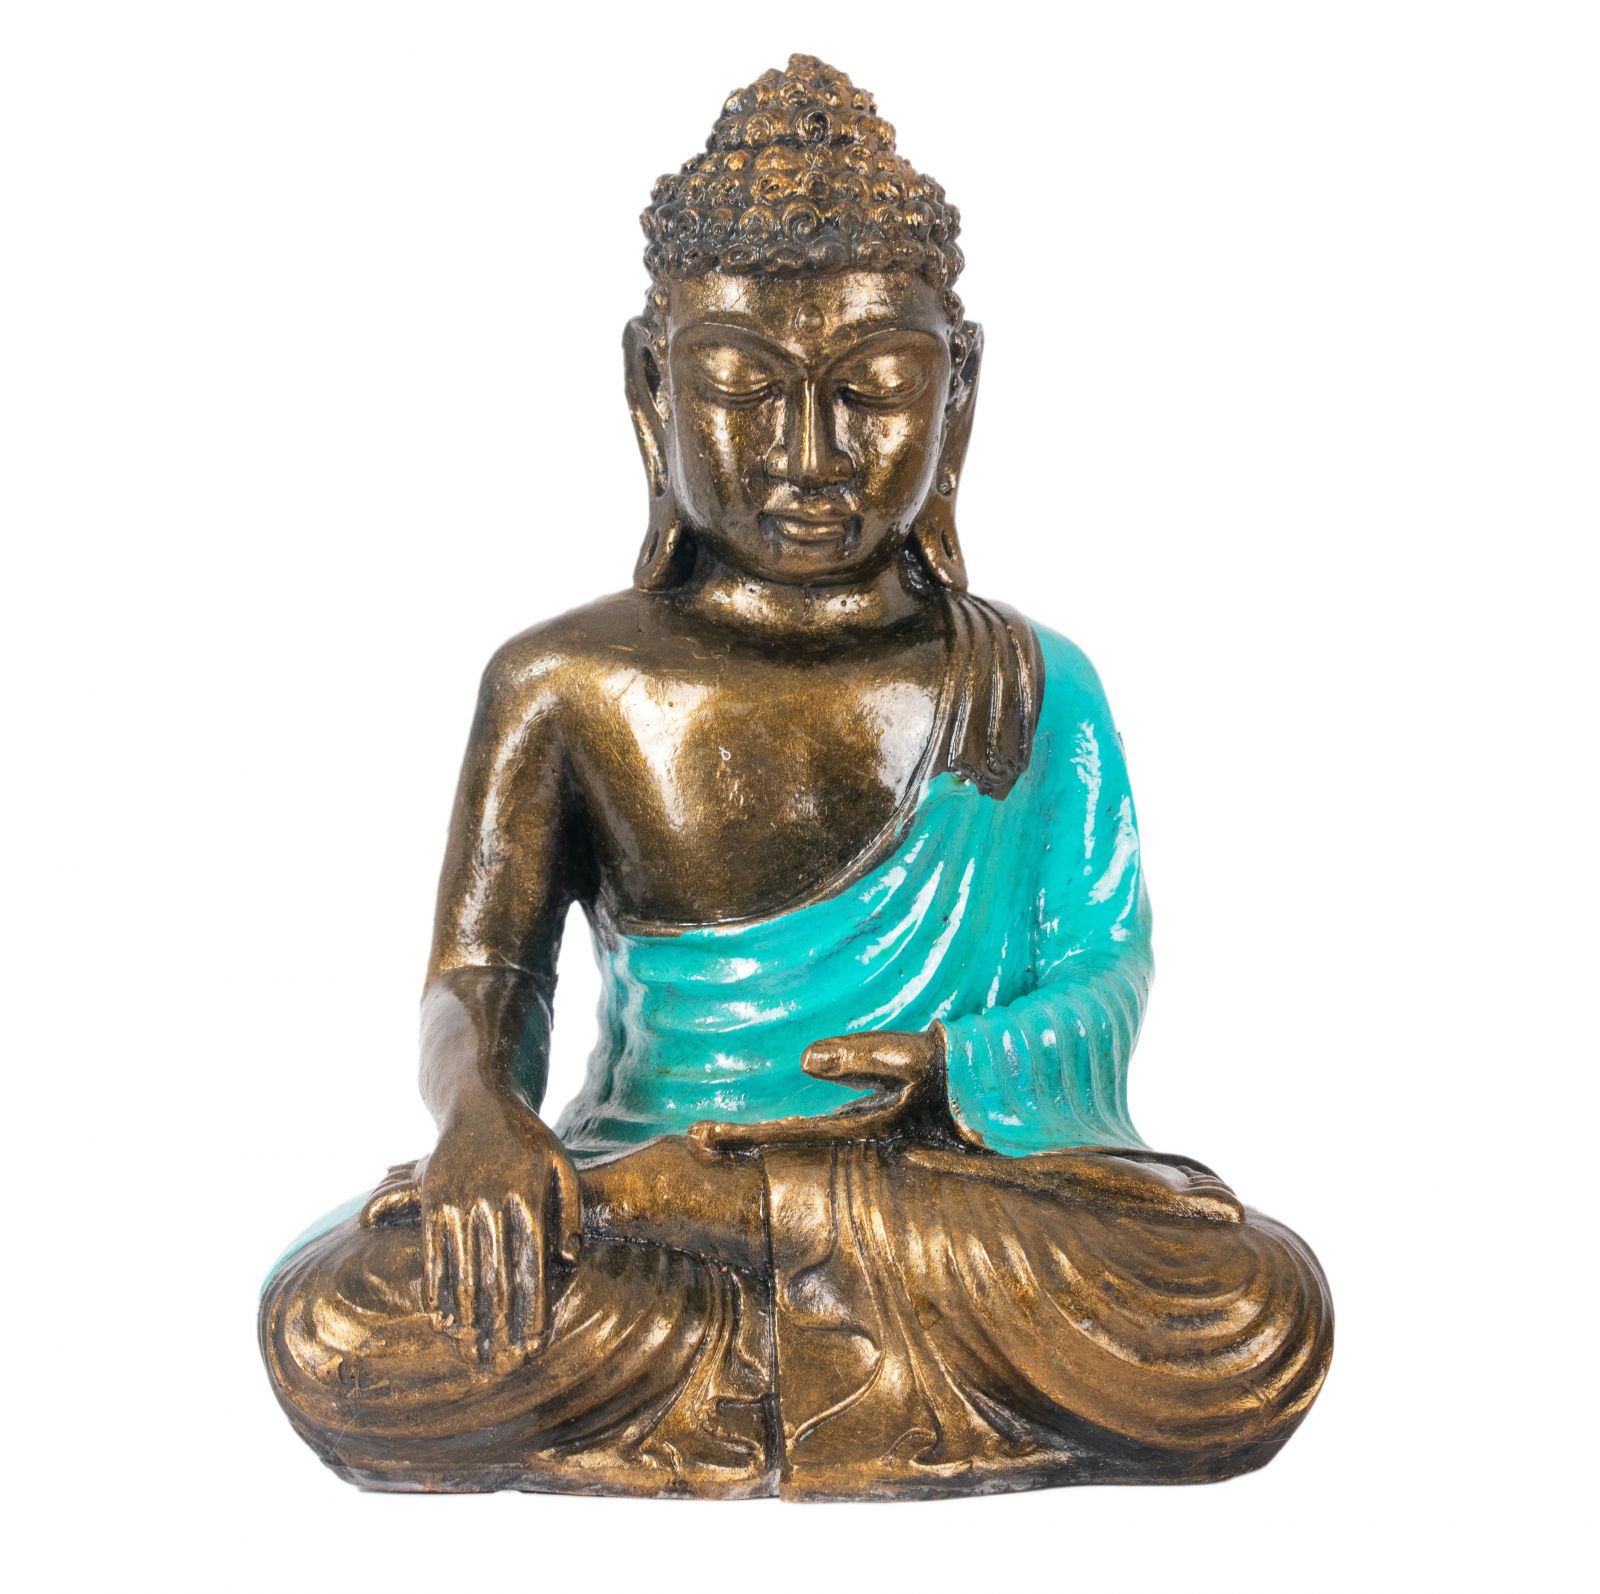 Painted resin statuette Colourful Buddha 23 cm turquoise Indonesia